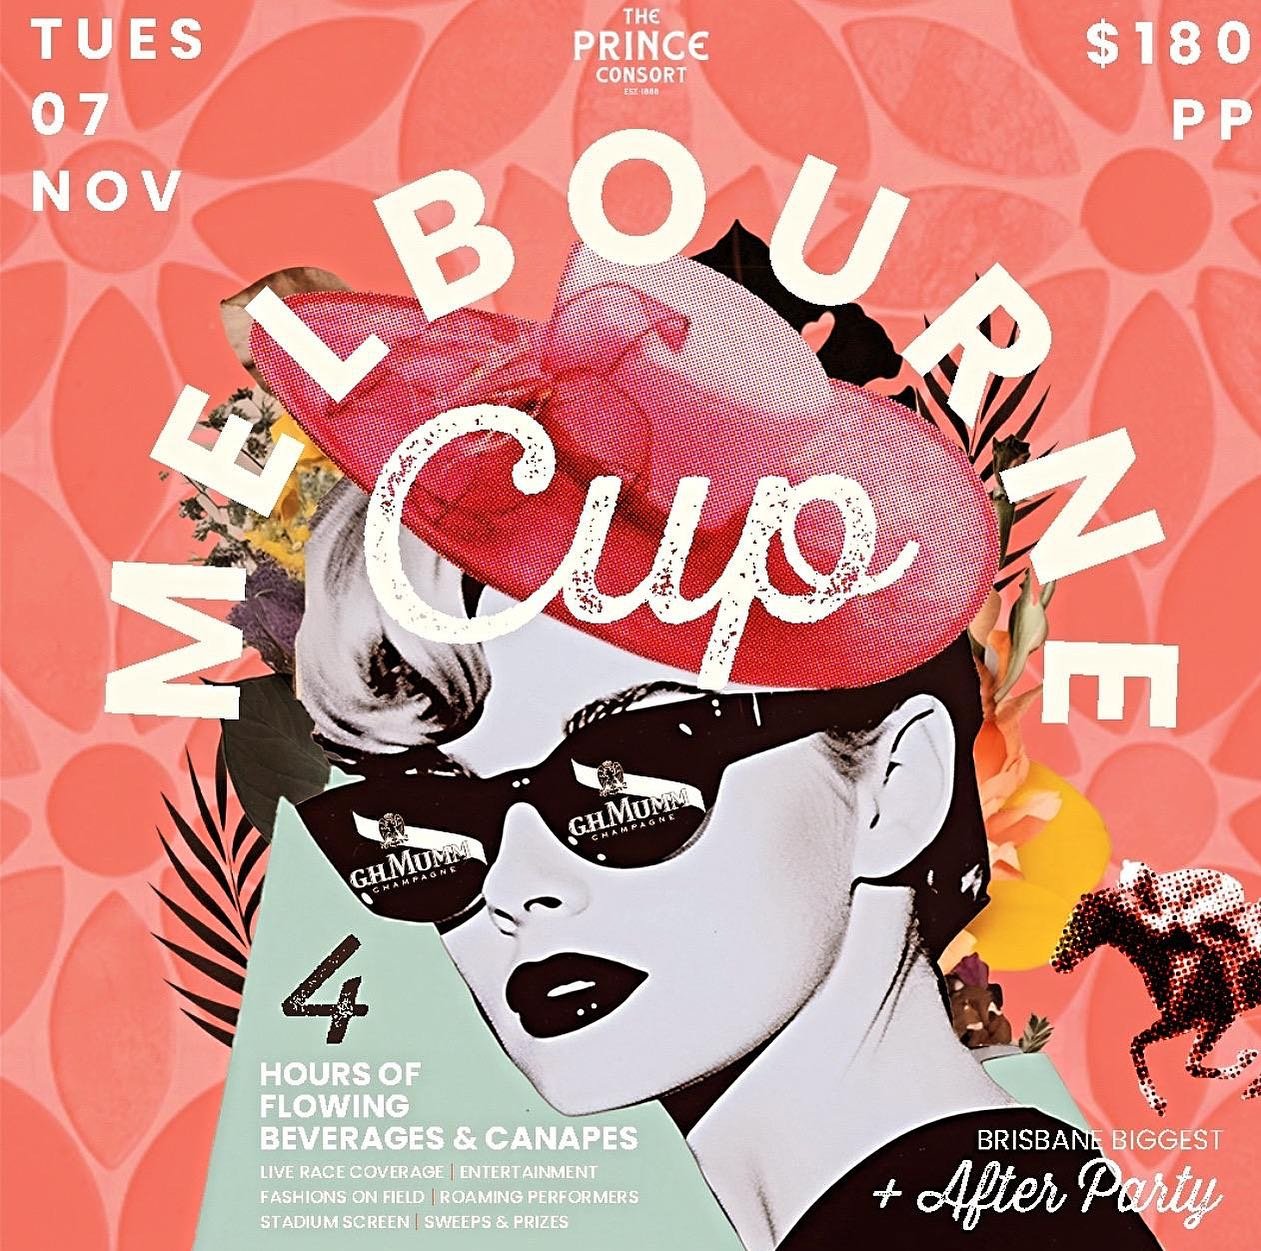 Saddle up and Gather &rsquo;round, race enthusiasts, as we gear up for the most exhilarating and opulent event of the year &ndash; The Melbourne Cup at The Prince Consort! @theprincebris 

It&rsquo;s time to unleash your inner glamour with dazzling f